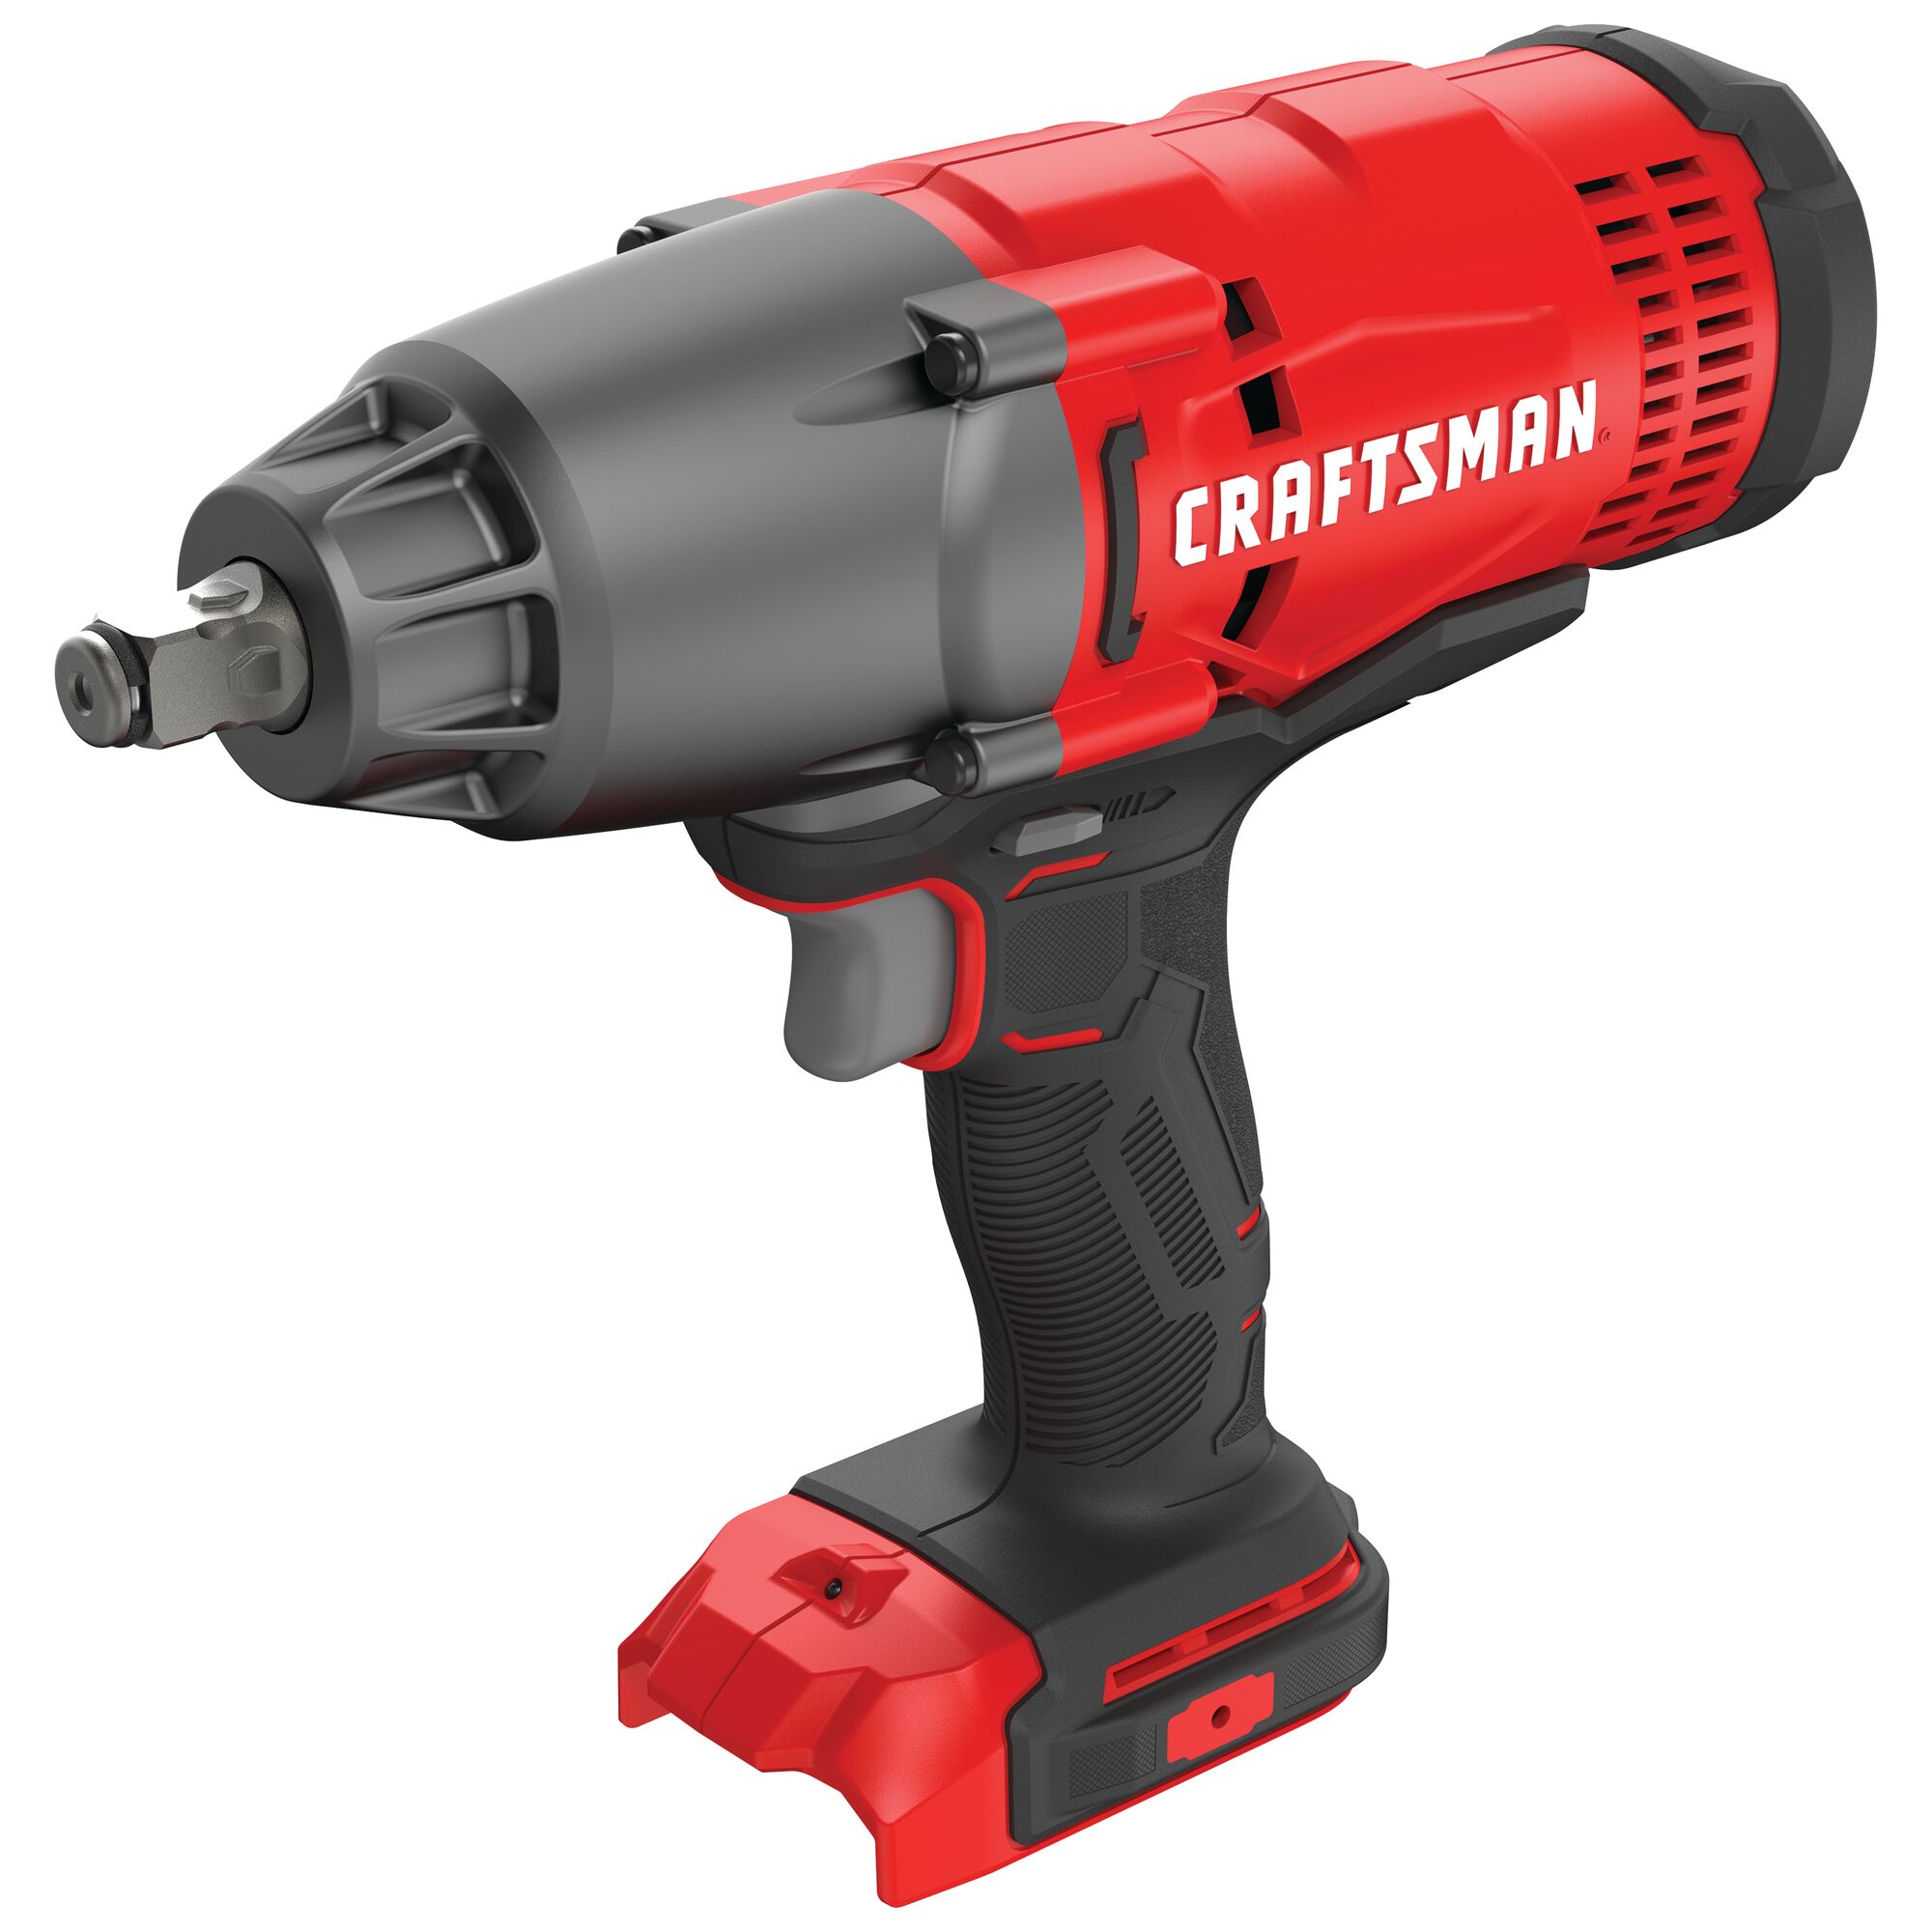 Cordless half inch impact wrench tool.